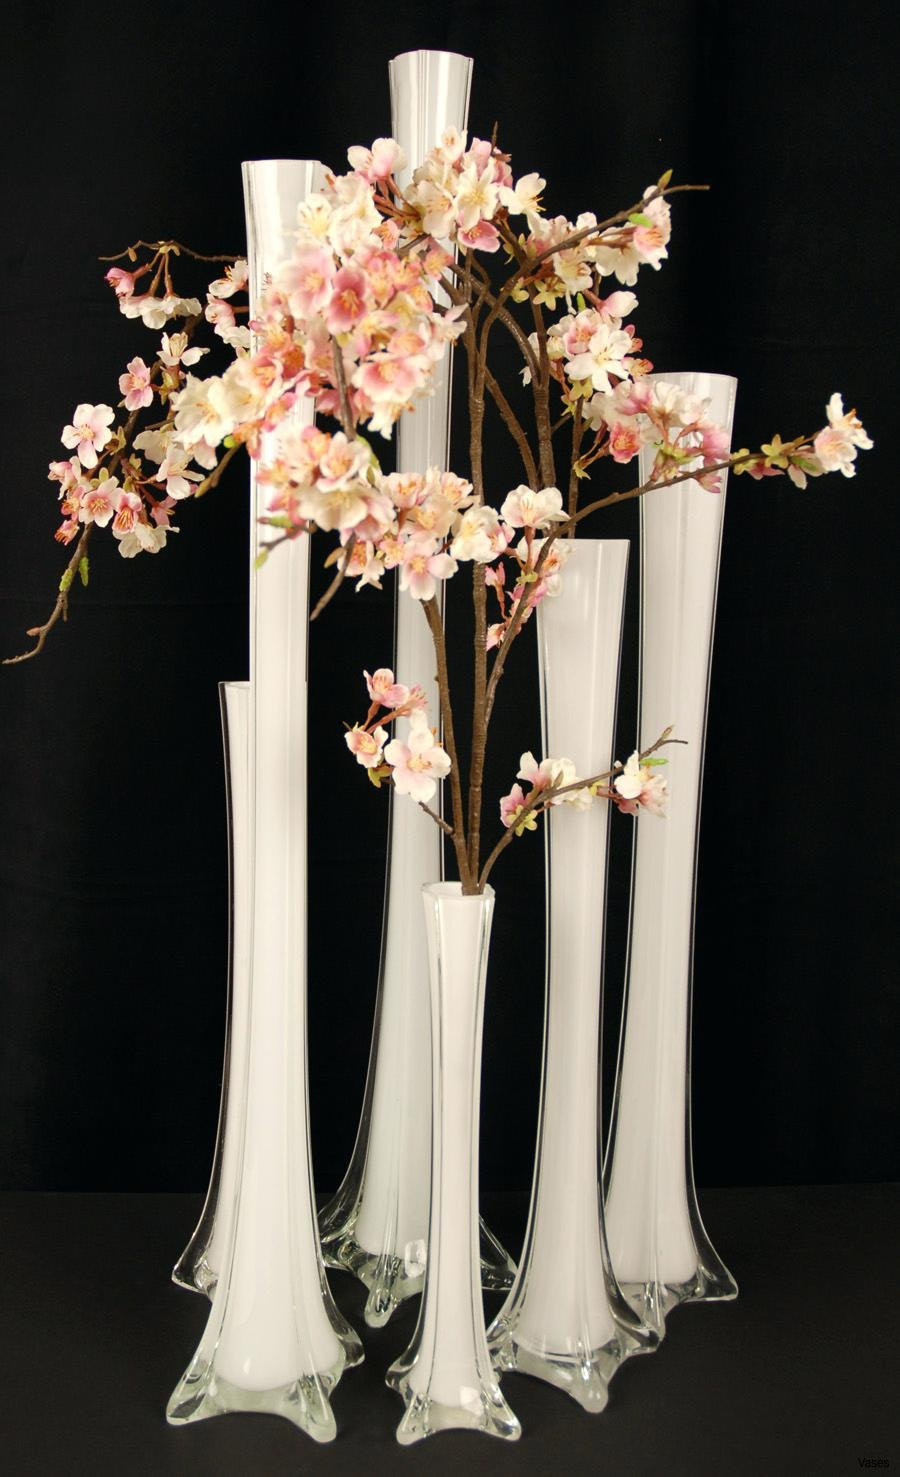 24 Popular Cheap Flower Vases for Weddings 2024 free download cheap flower vases for weddings of vases plastic tower eiffel vase 31 25in frostedi 0d with led light for vases plastic tower eiffel vase 31 25in frostedi 0d with led light according to luxu